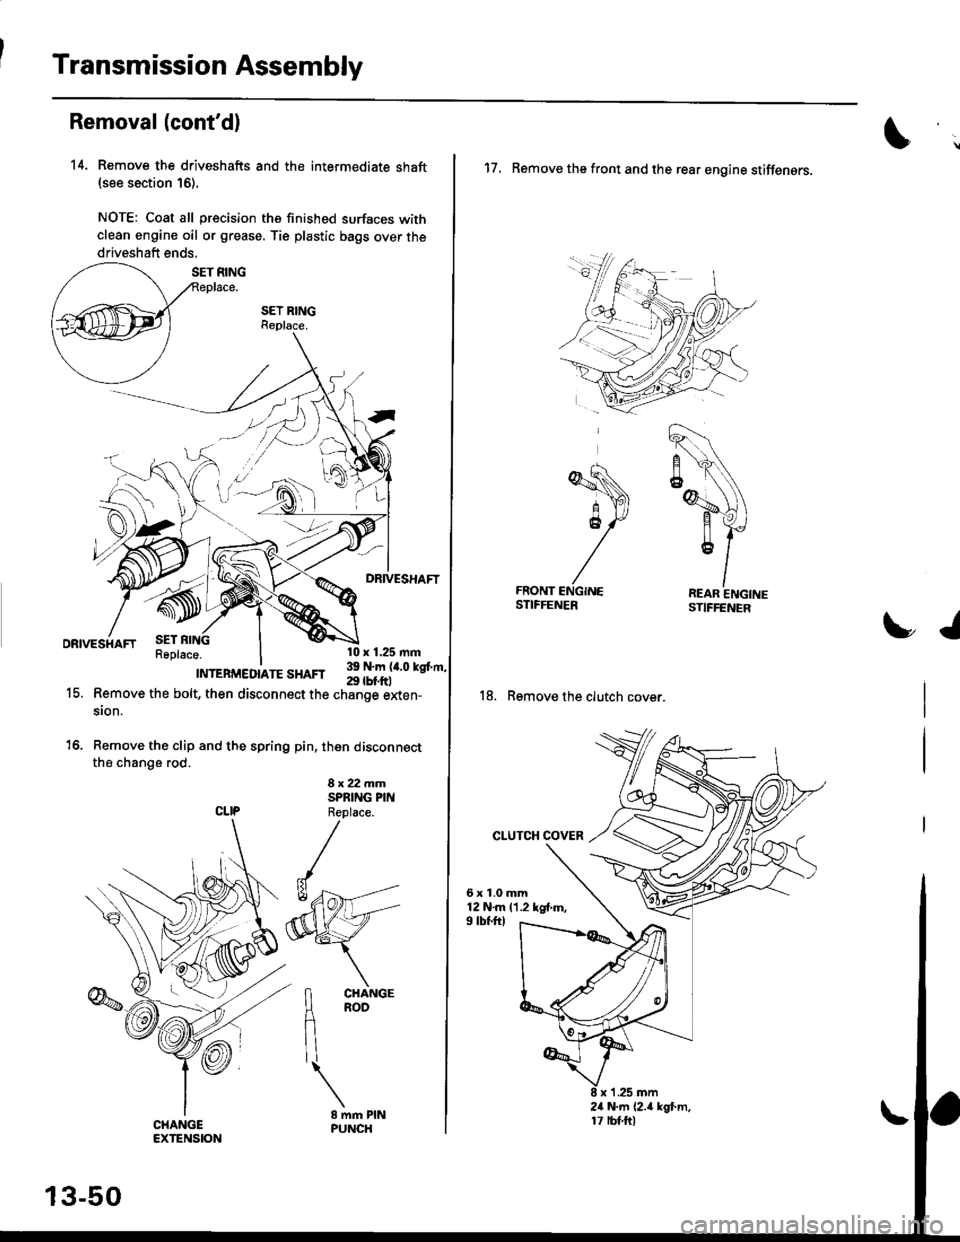 HONDA CIVIC 2000 6.G Owners Manual Transmission Assembly
Removal(contd)
14. Remove the driveshafts and the intermediate shaft(see section 16).
NOTE: Coat all precision the finished surfaces with
clean engine oil or grease. Tie plastic